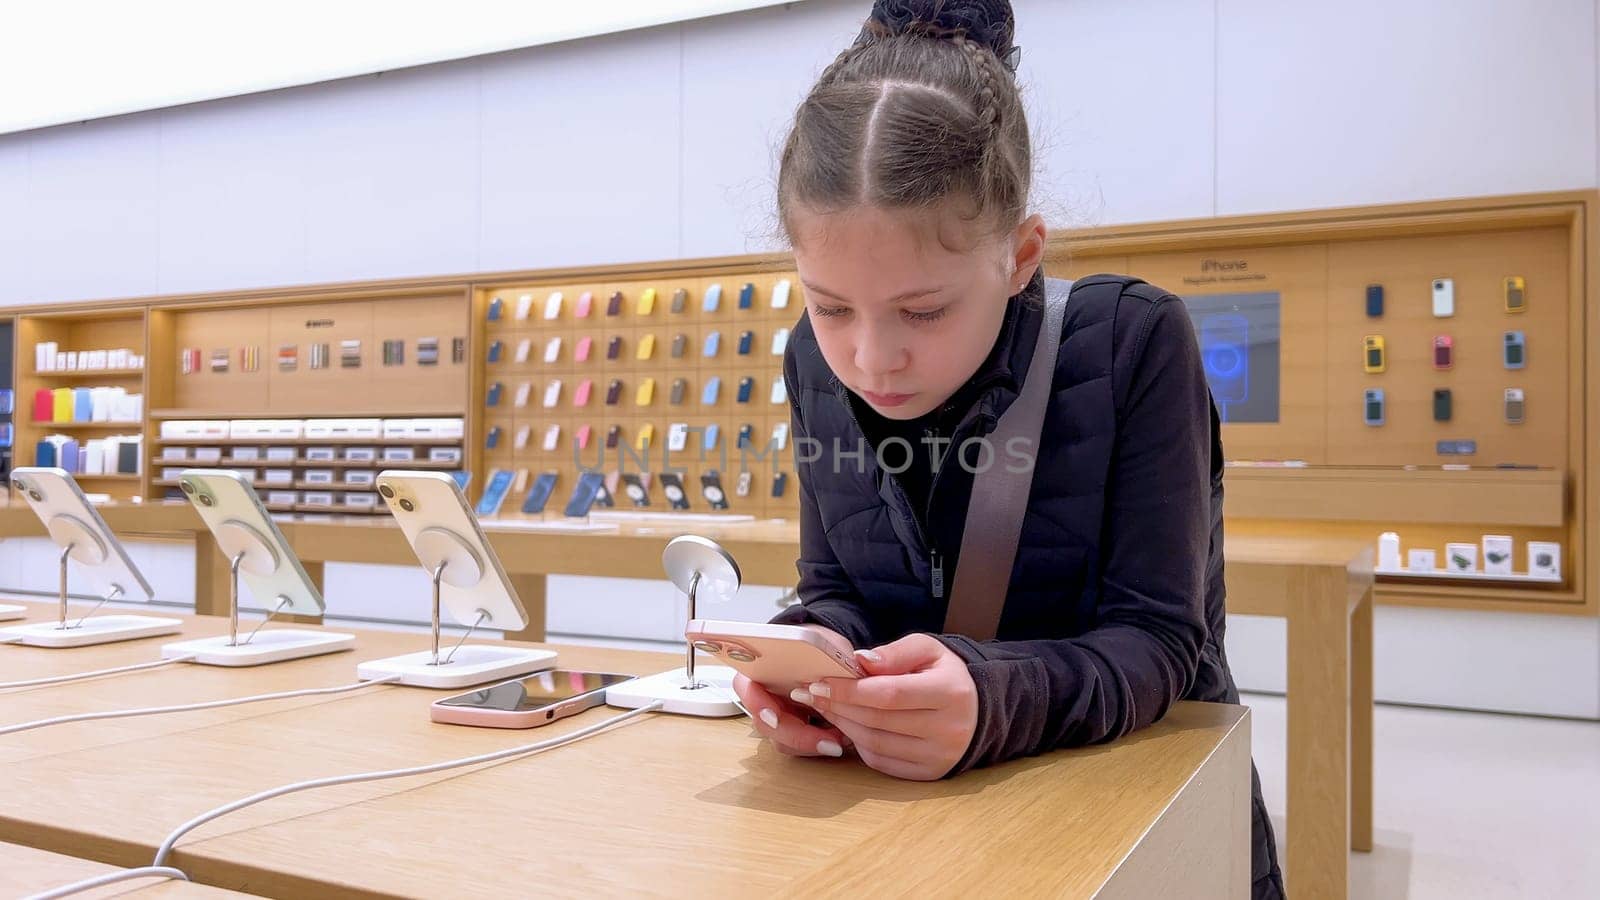 Little Girl Exploring New iPhones at Apple Store in Park Meadows Mall by arinahabich